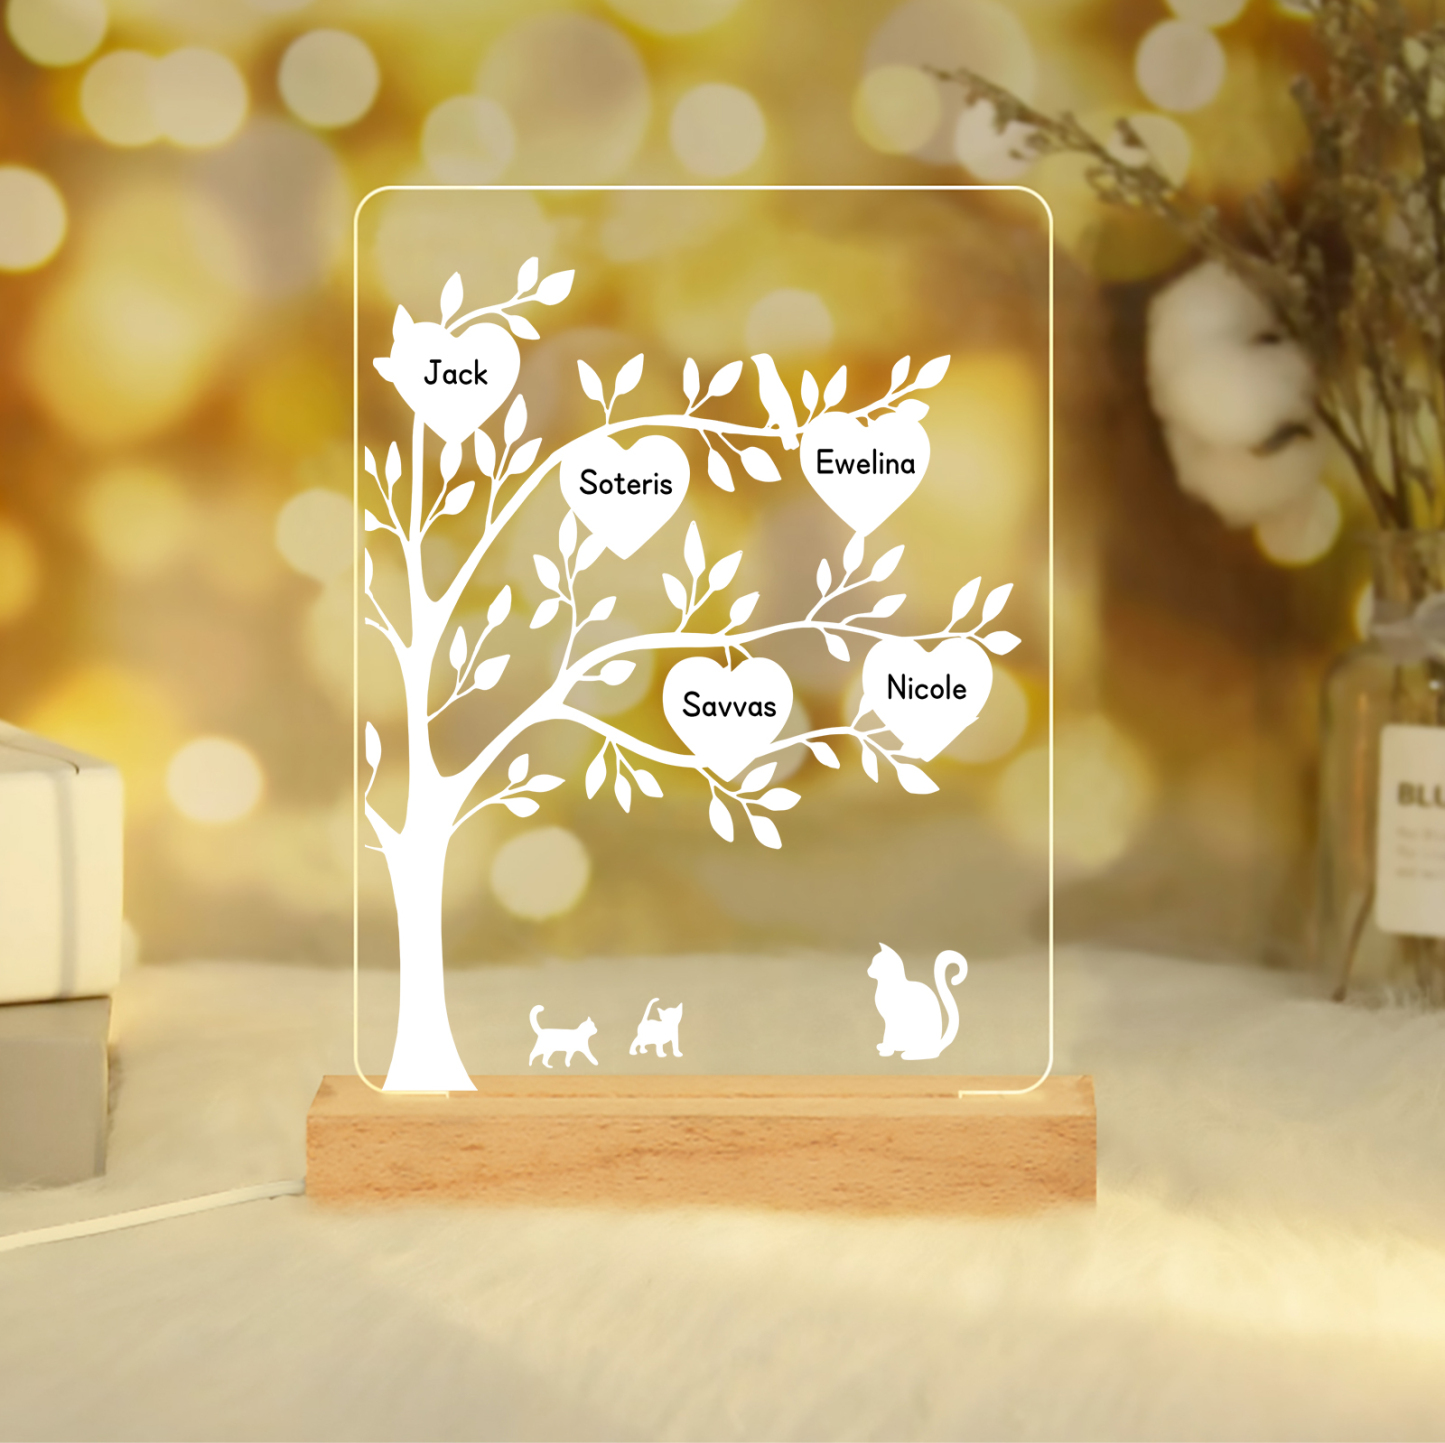 5 Names - Personalized Leaf Style Night Light With Custom Text LED Light Gift For Family